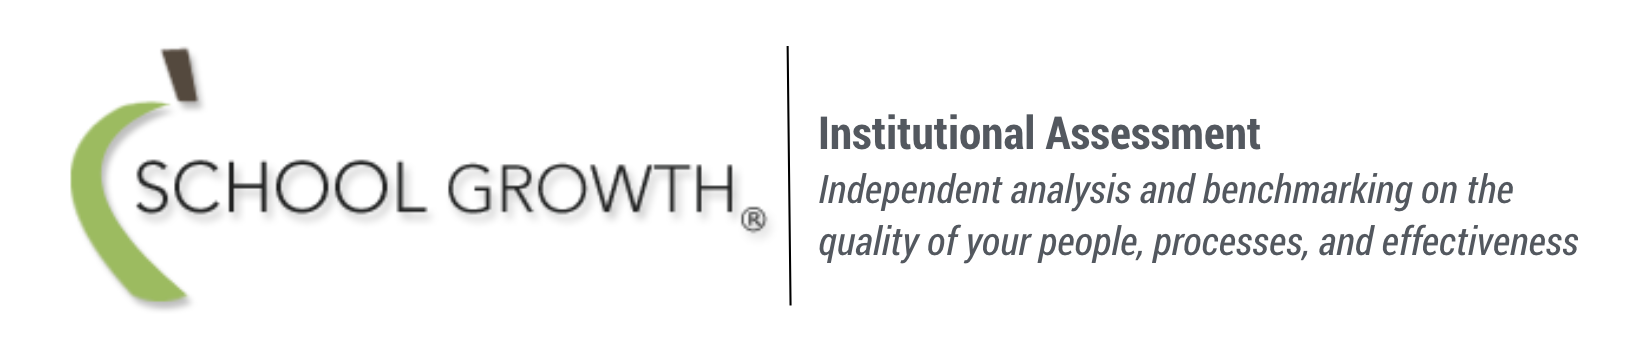 Institutional_Assessment_Banner.png